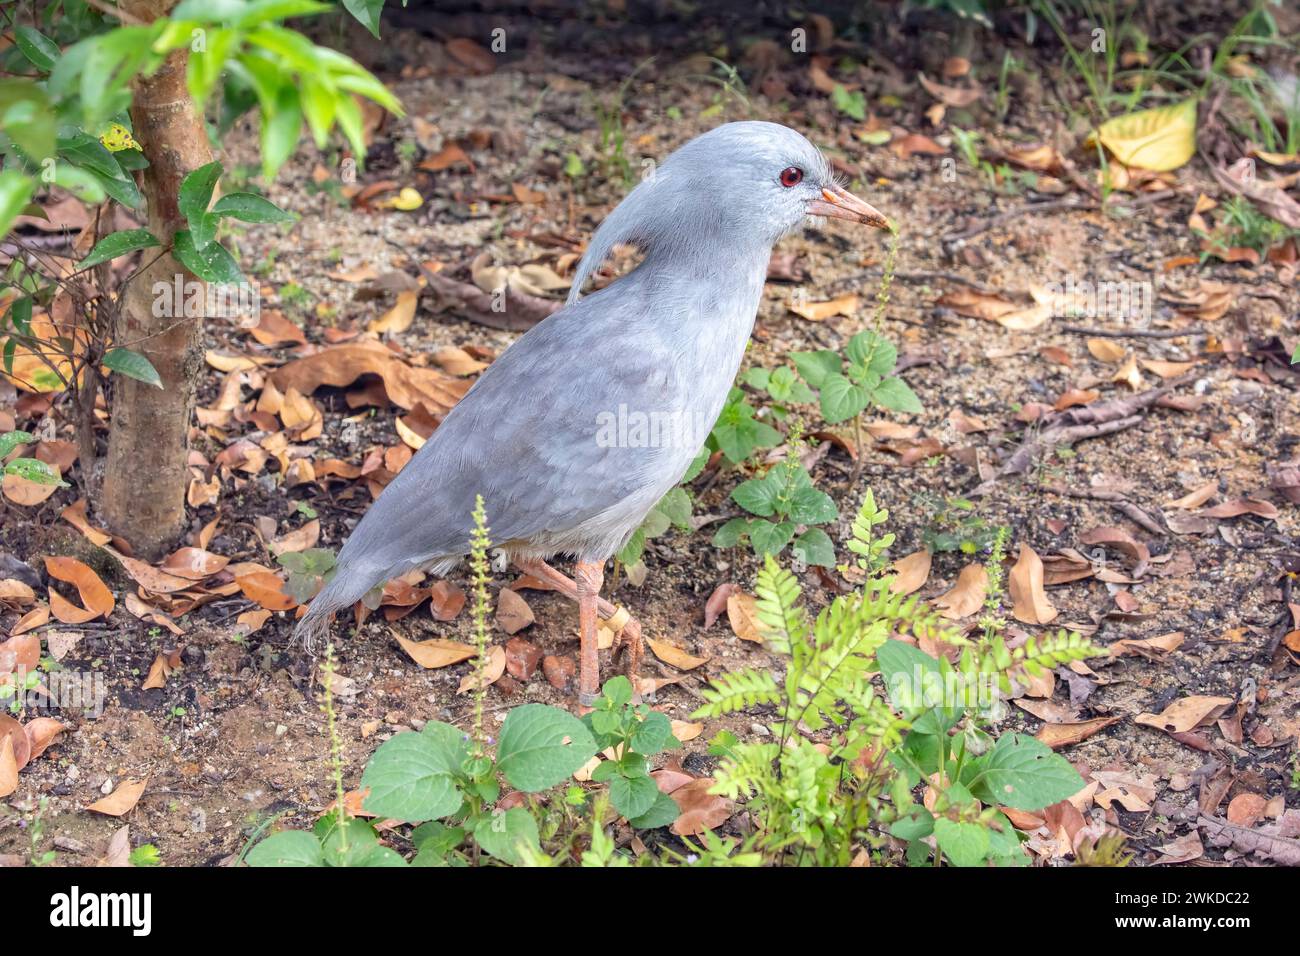 the closeup image of Kagu. It is a crested, long-legged, and bluish-grey bird endemic to the dense mountain forests of New Caledonia. Stock Photo